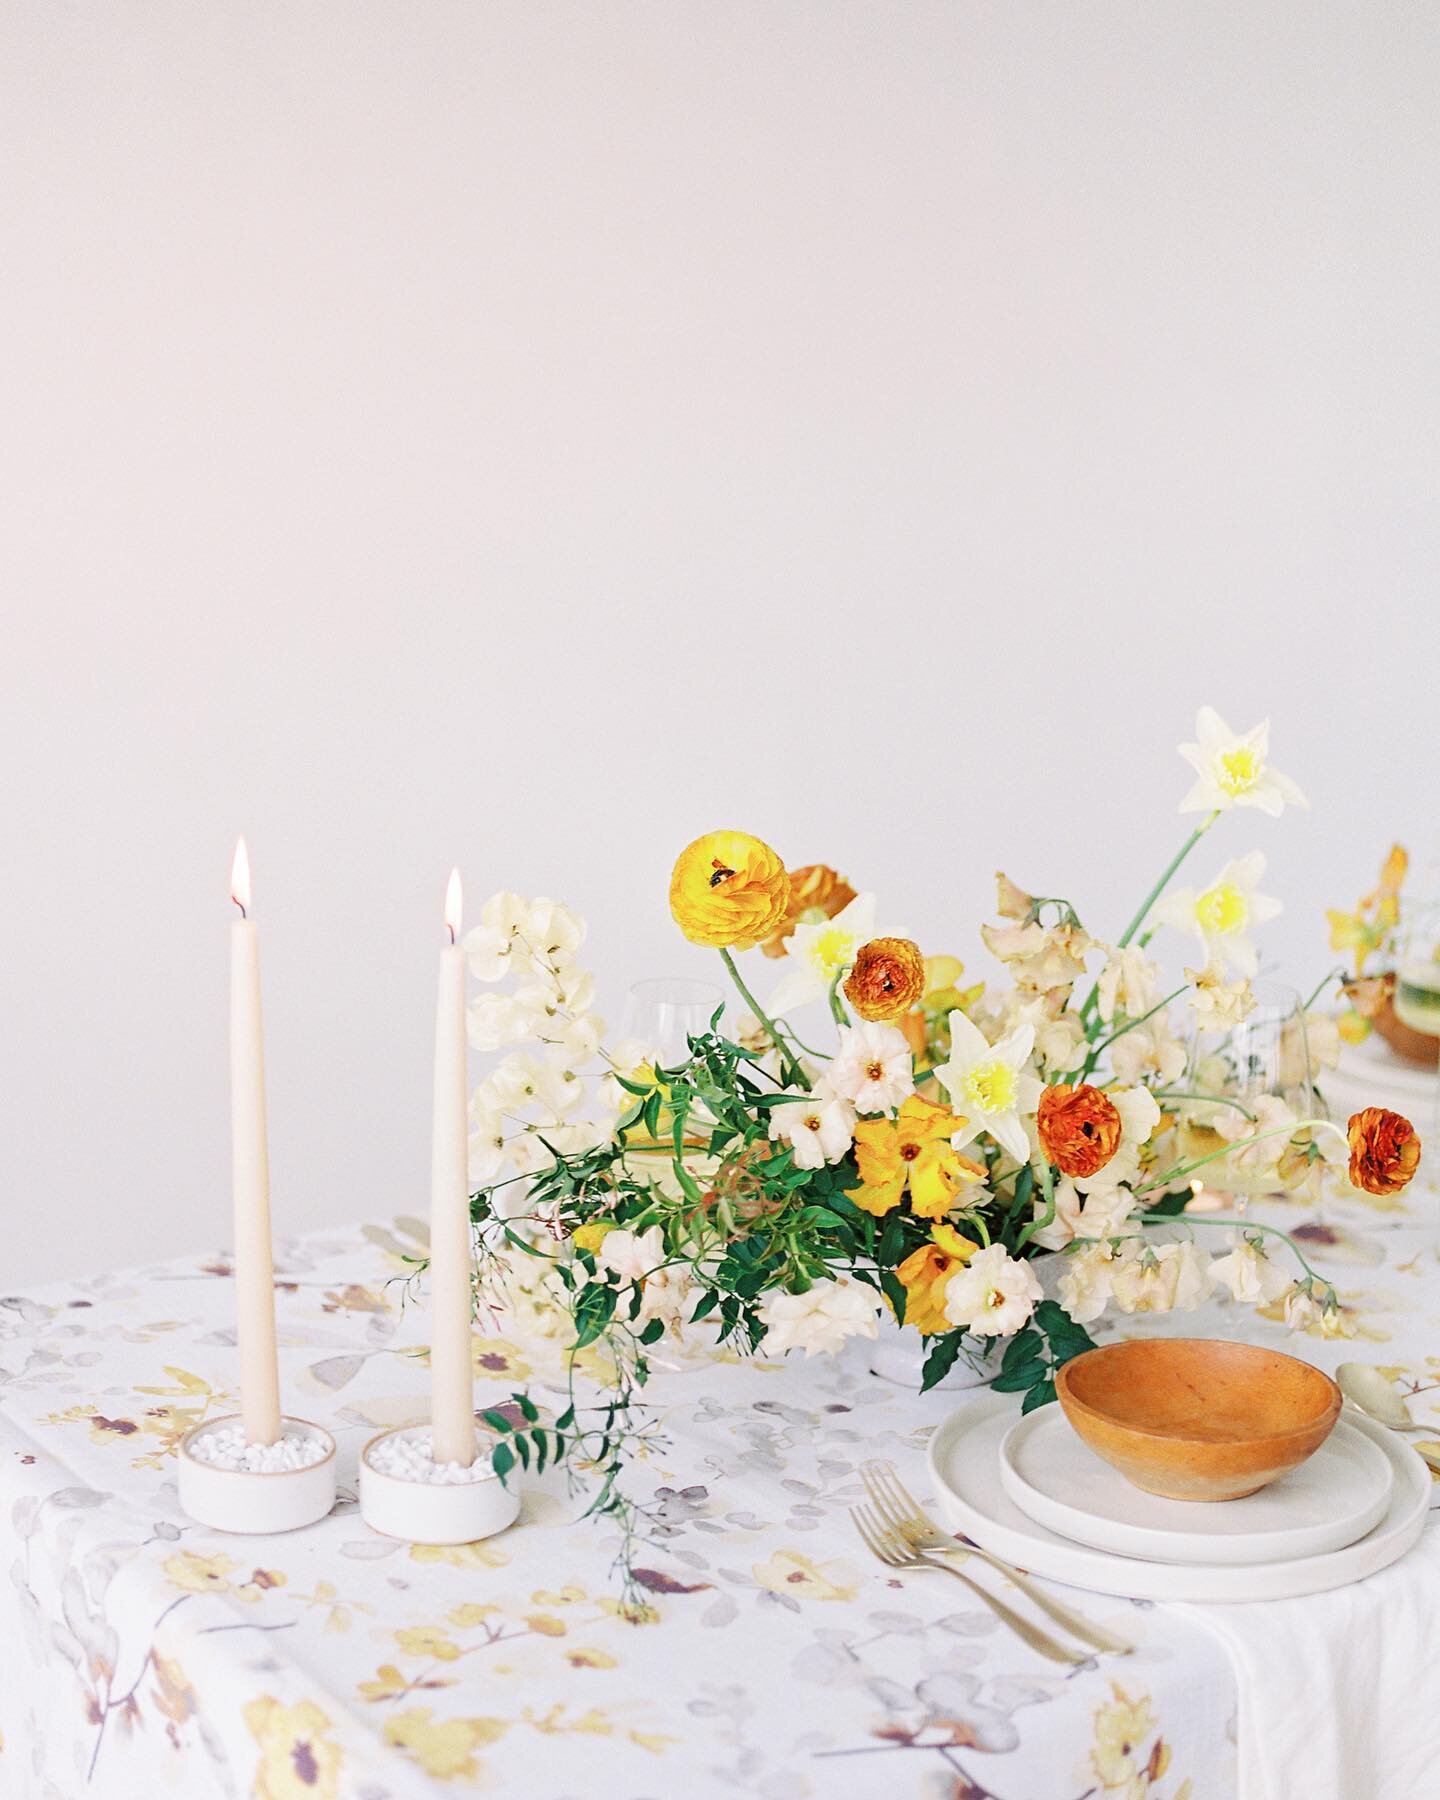 Thankful for all of our couples who have let us help set a beautiful table for your loved ones this year and for all the years past. 
Wishing you a beautiful thanksgiving with those that you love most 💛
.
@autumnsilvaphotography 
@reneebreannedesign